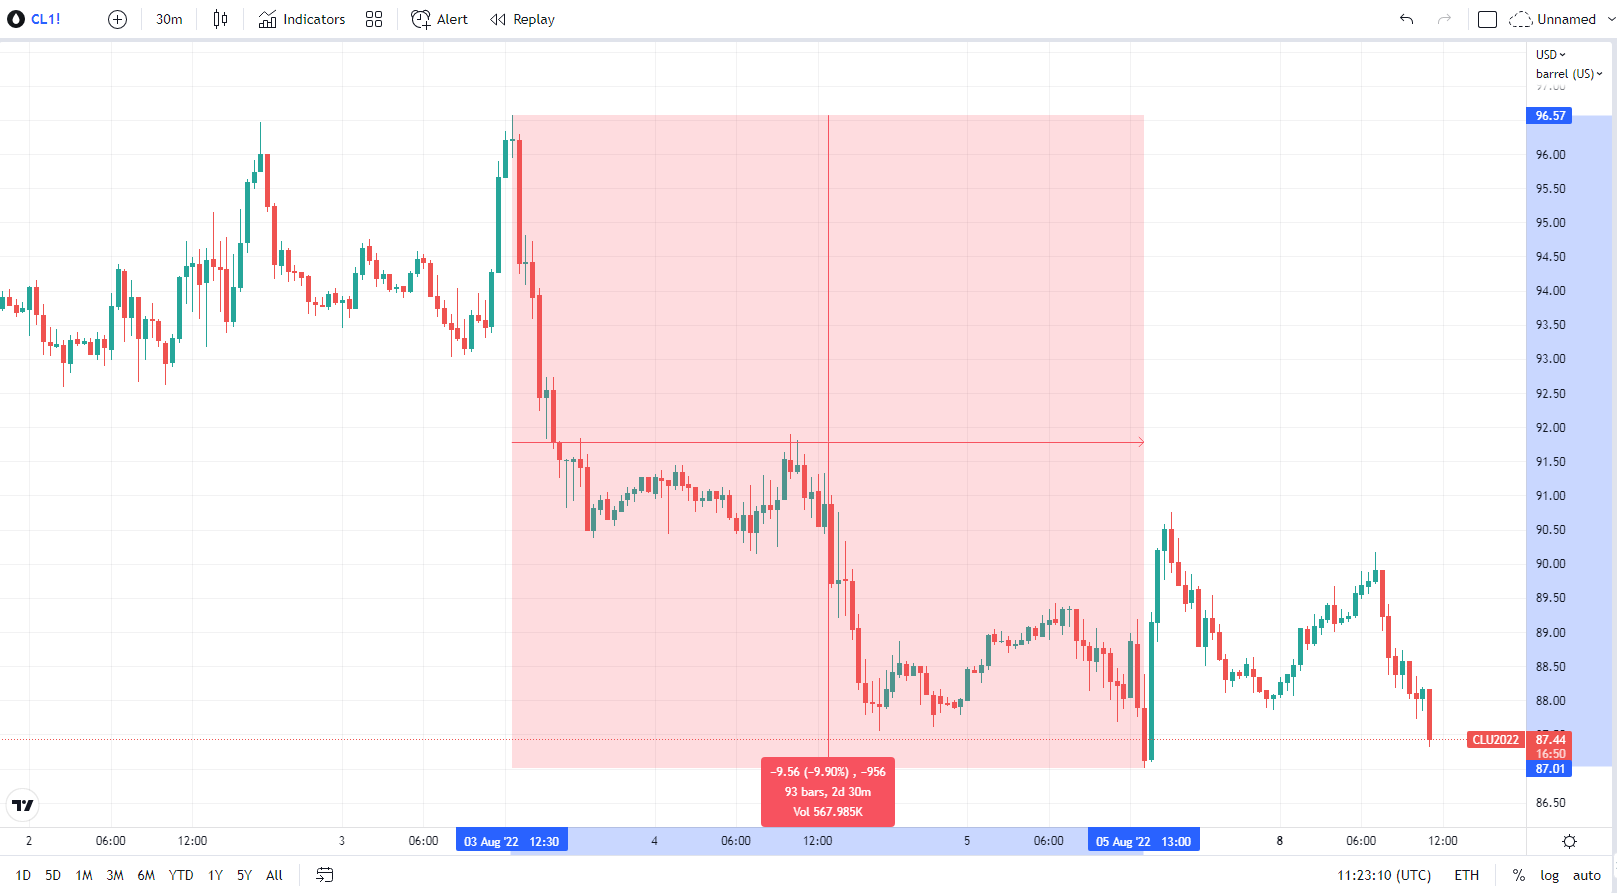 30 minutes chart of CL (Crude Oil Futures), Decrease of the price of a commodity from OPEC meeting. Source: tradingview.com